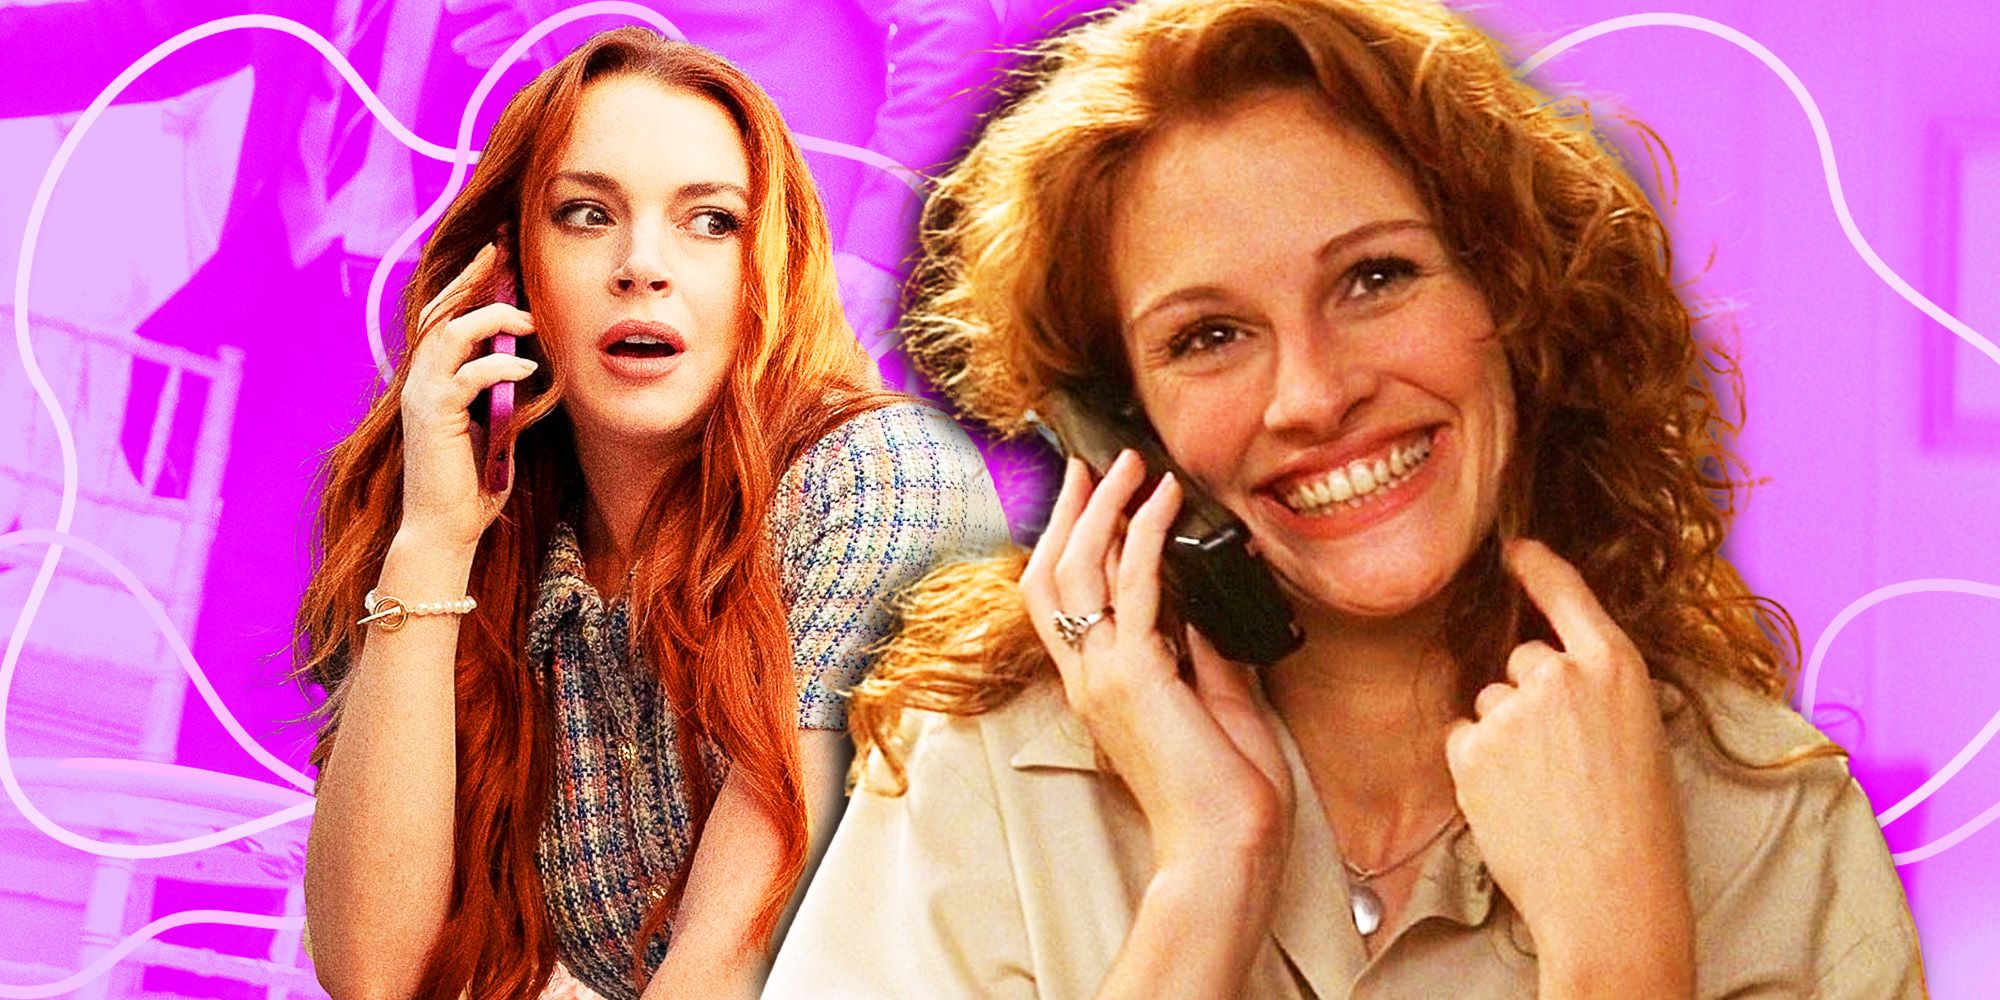 Lindsay Lohan's New Netflix Movie Gives A Twist To A Popular Rom-Com Released 27 Years Ago